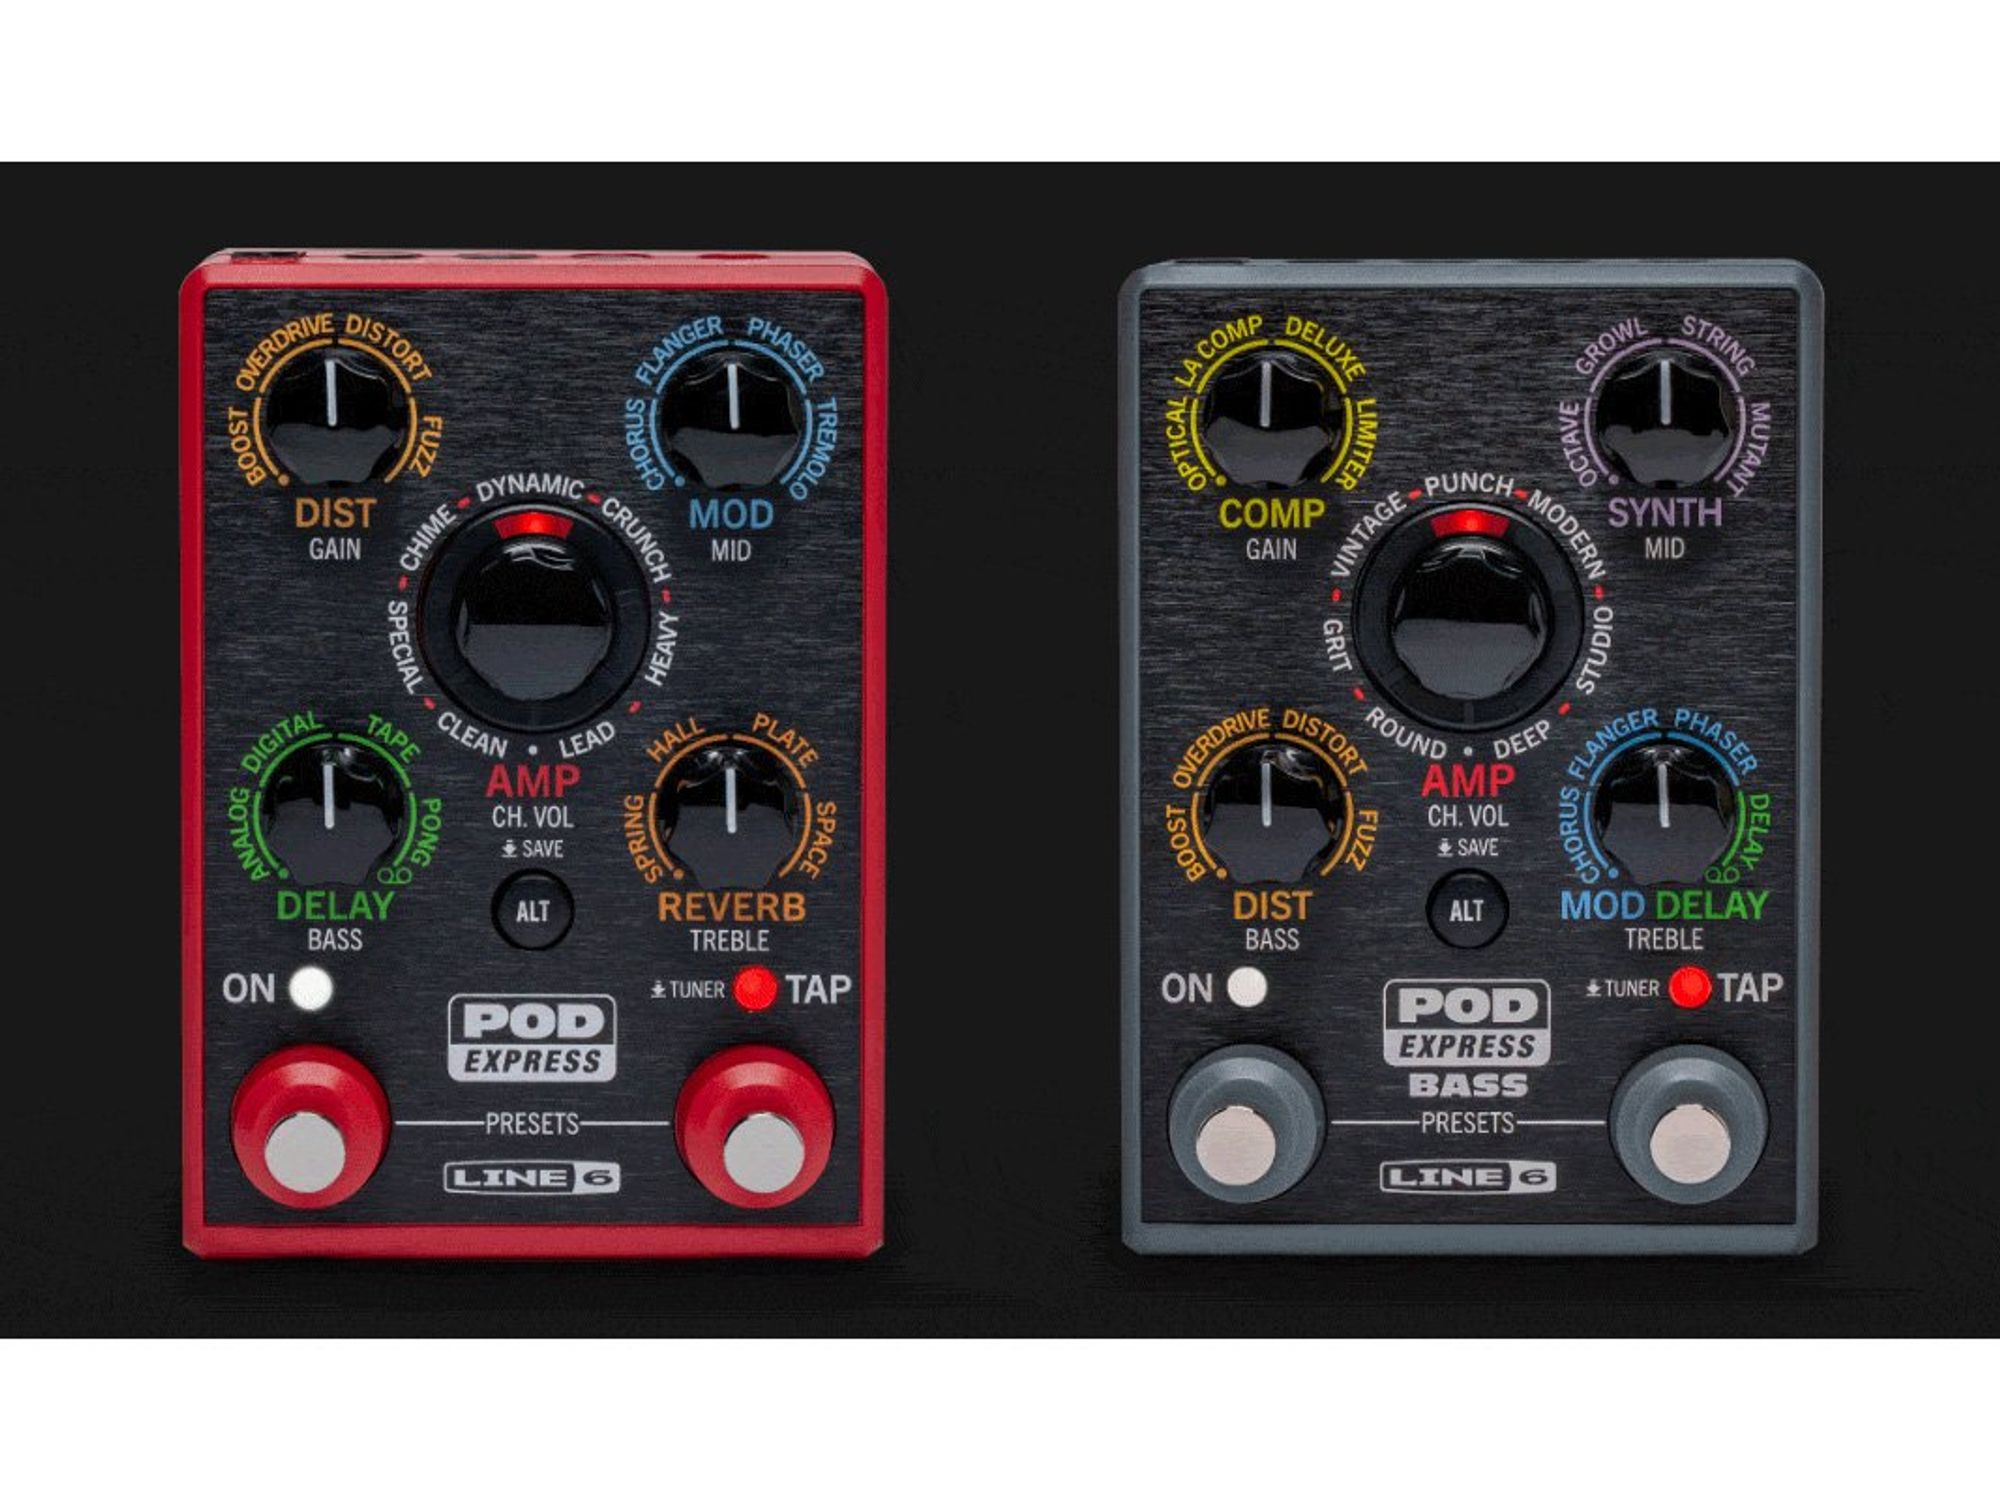 Line 6 Launches the POD Express and POD Express Bass